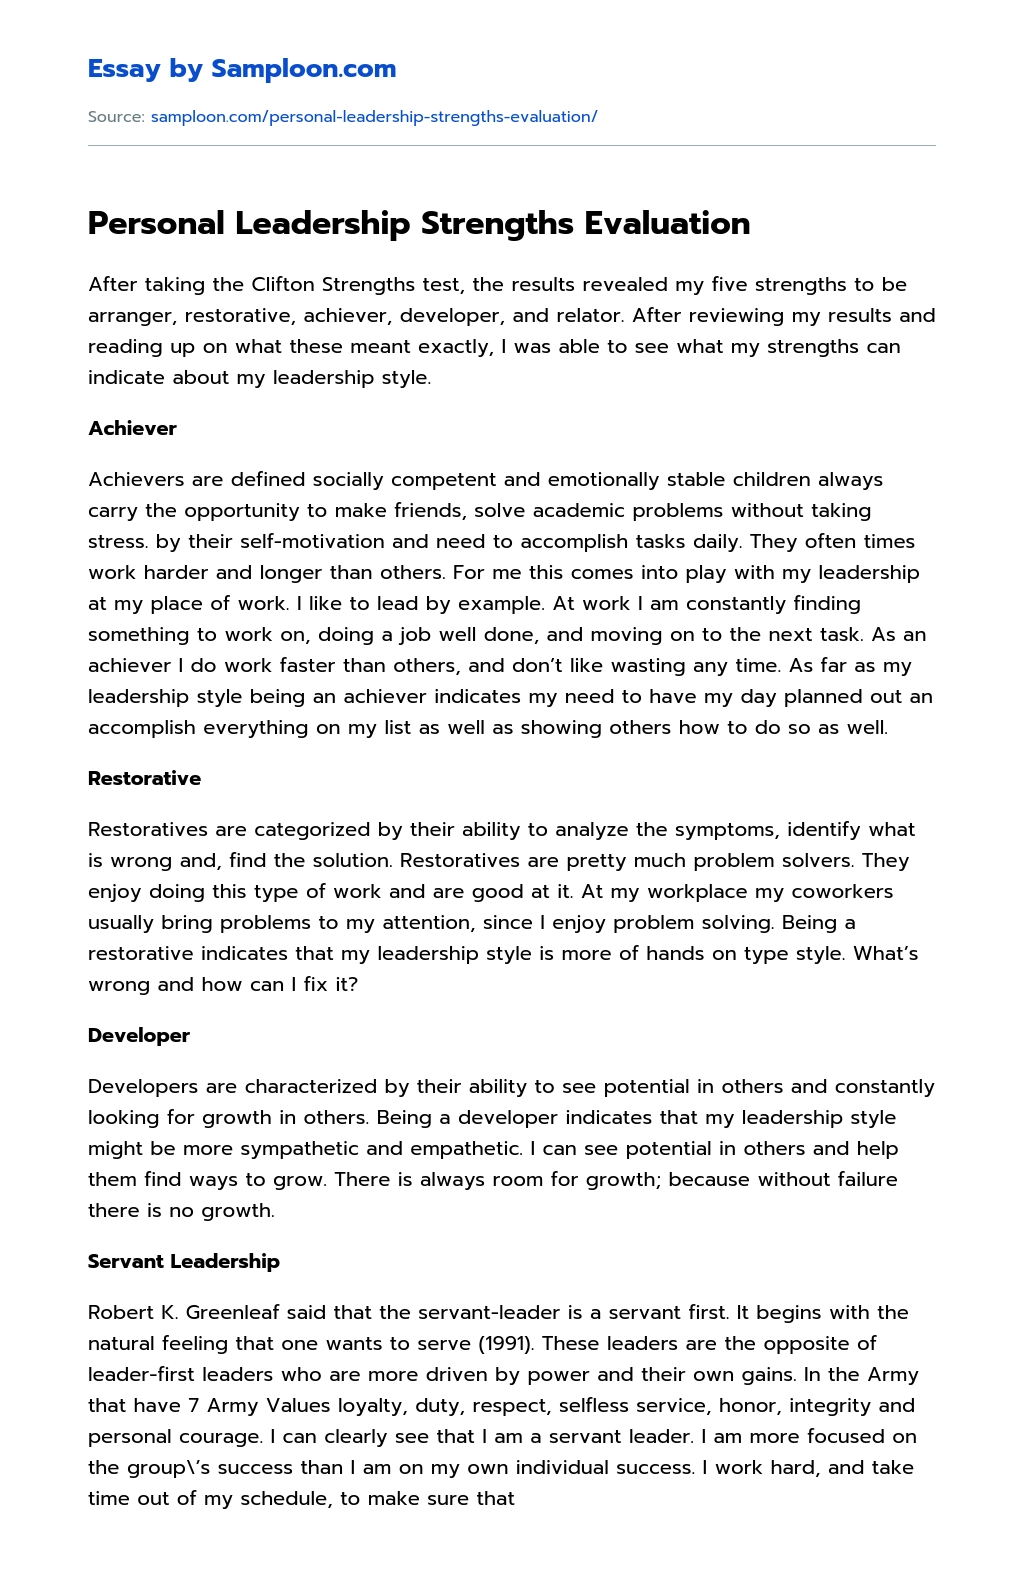 Personal Leadership Strengths Evaluation essay